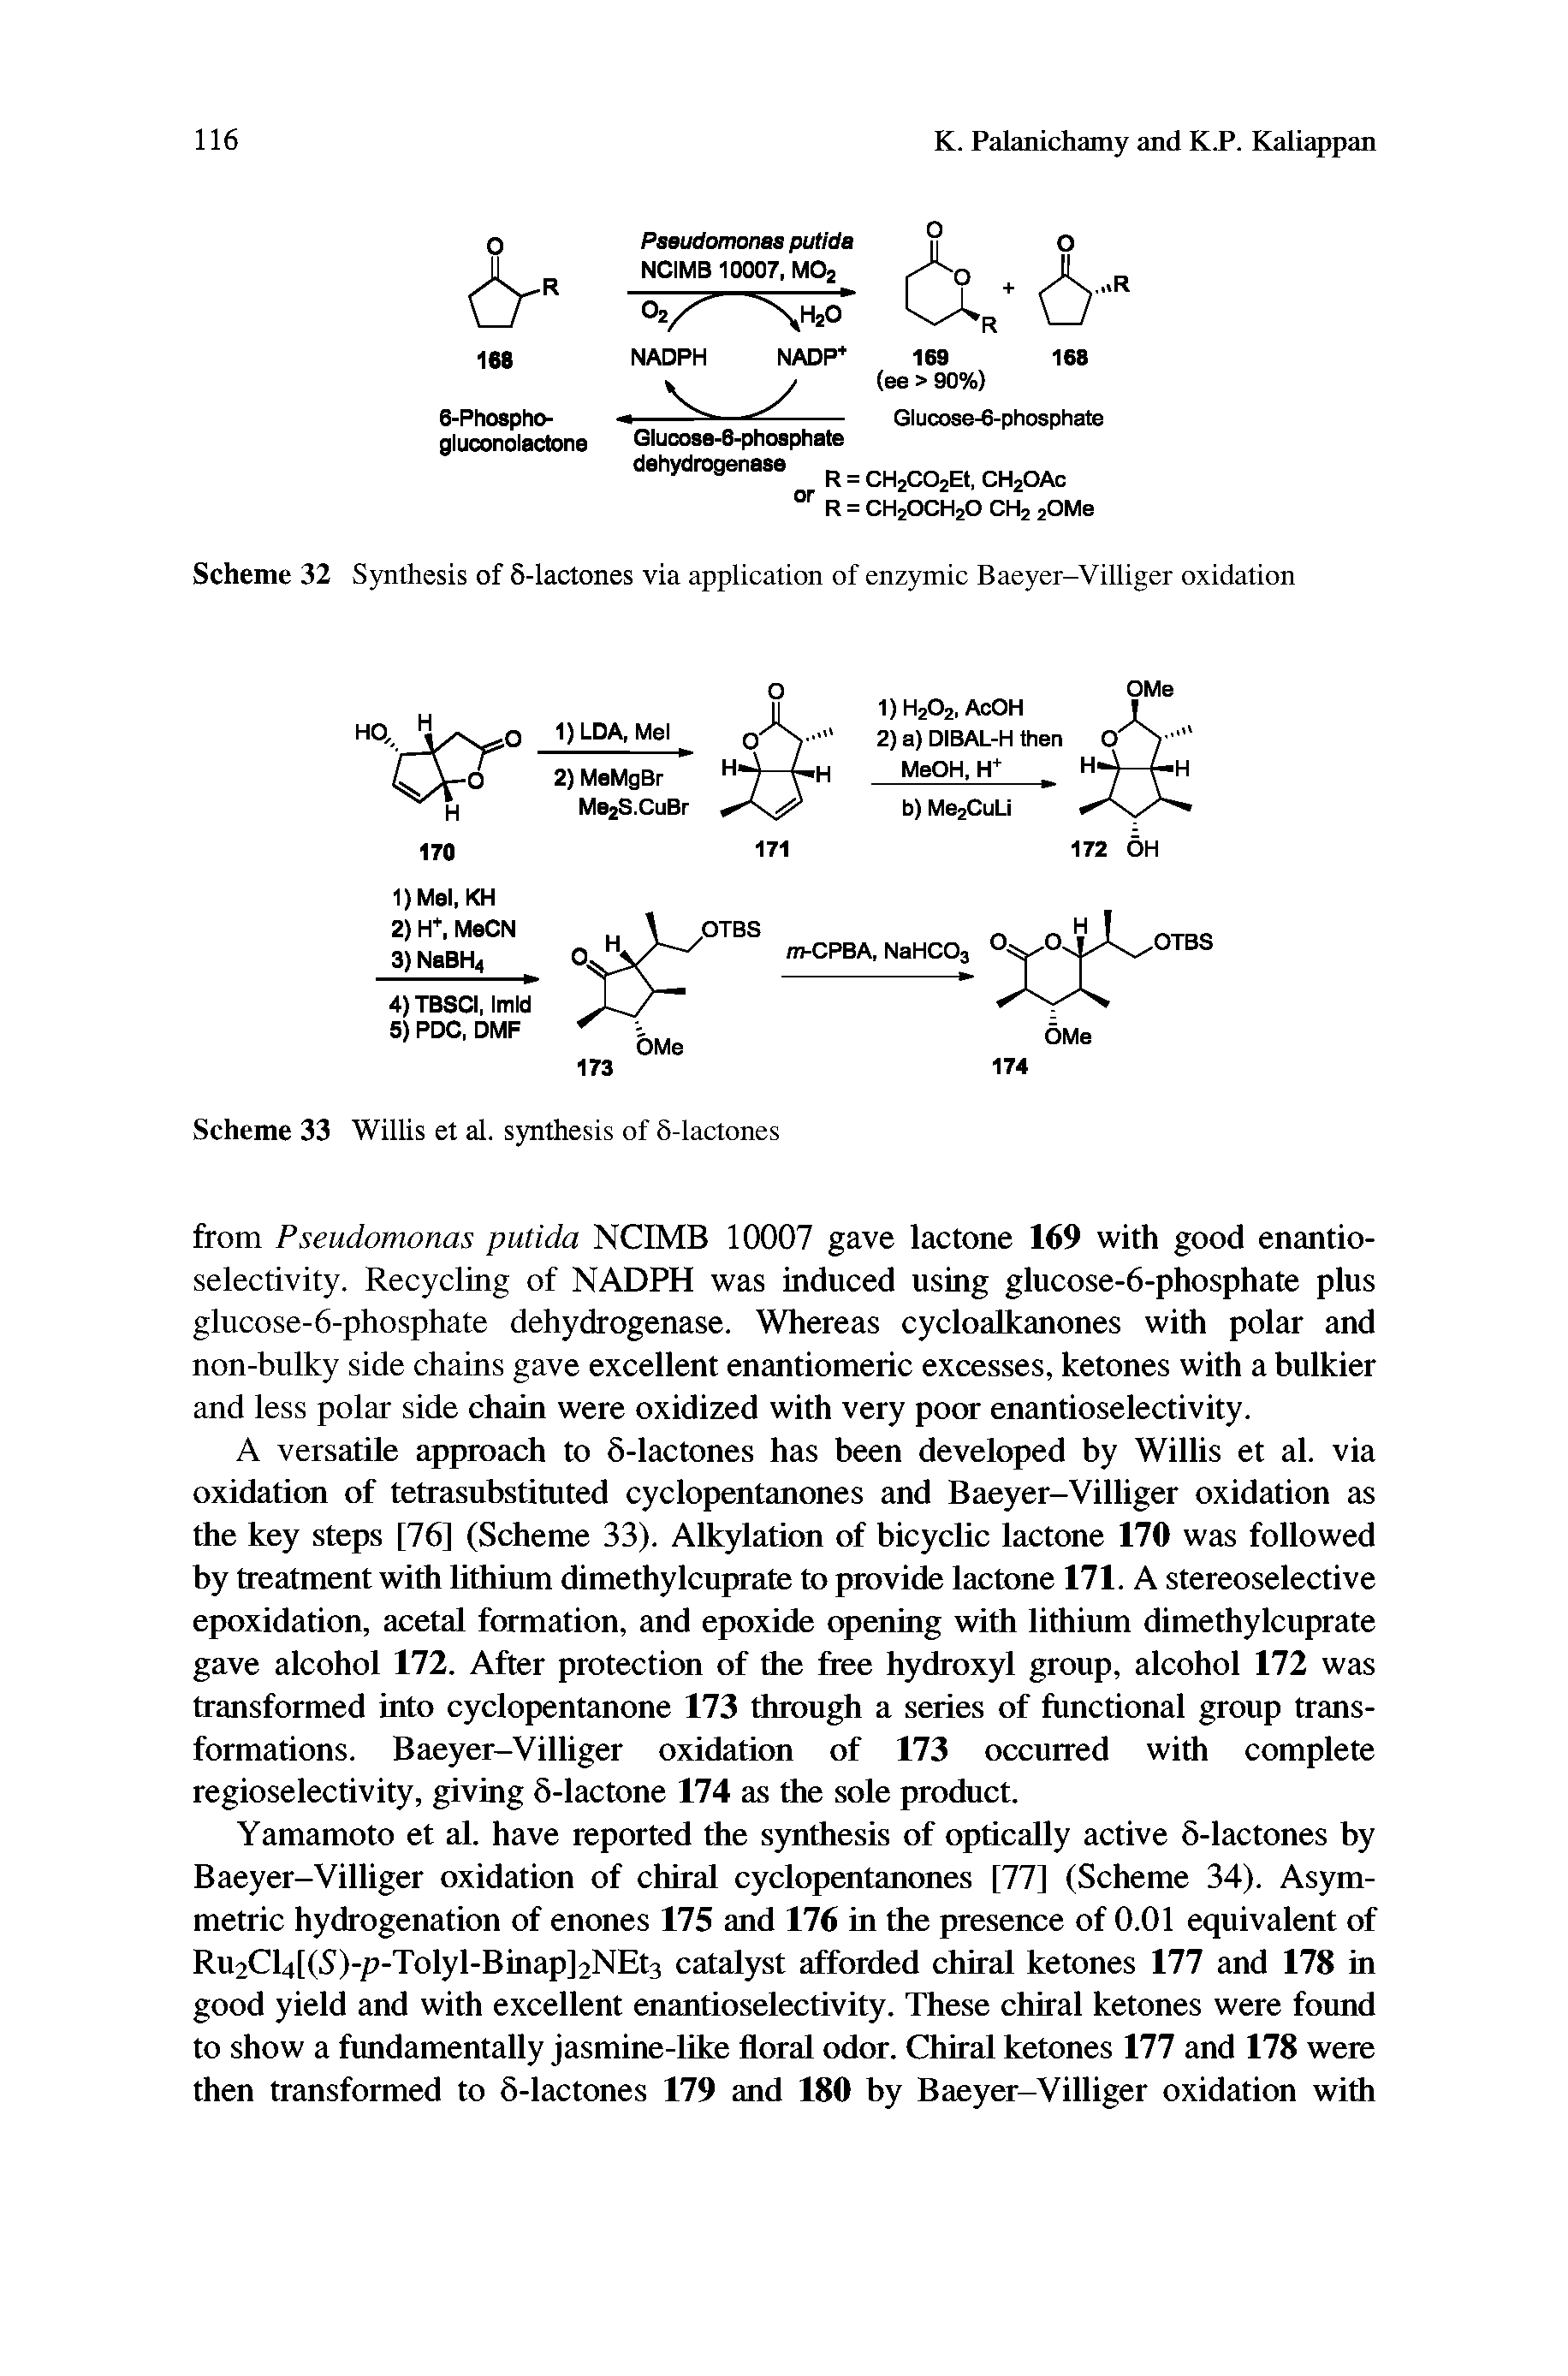 Scheme 32 Synthesis of 5-lactones via application of enzymic Baeyer-Villiger oxidation...